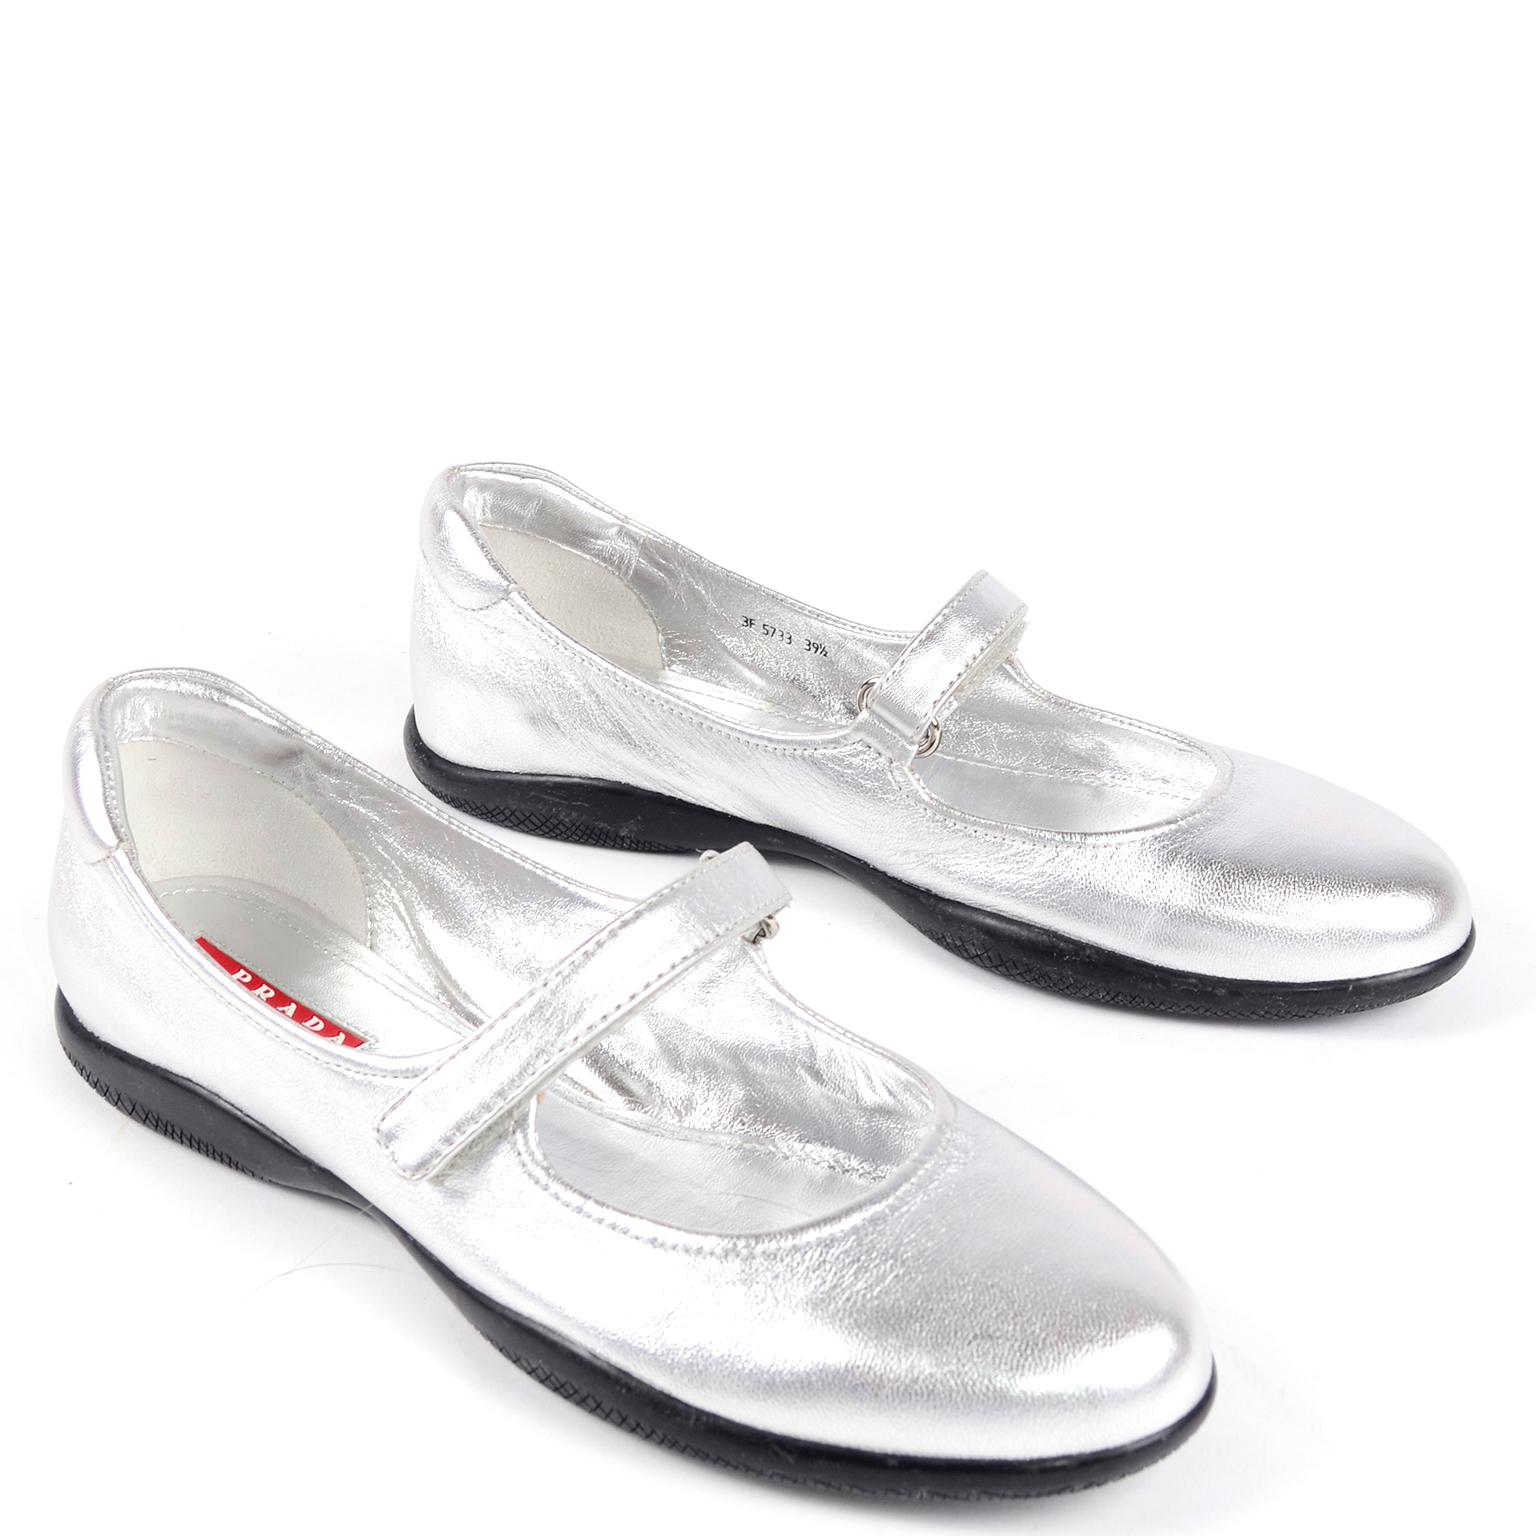 These pretty silver Prada shoes have ever been worn! These Mary Jane flats have a velcro strap, a round toe. and rubber sole. We think these can be worn casually or with holiday party dresses!  Labeled an Italian size 39.5
Measurements: 
BALL: